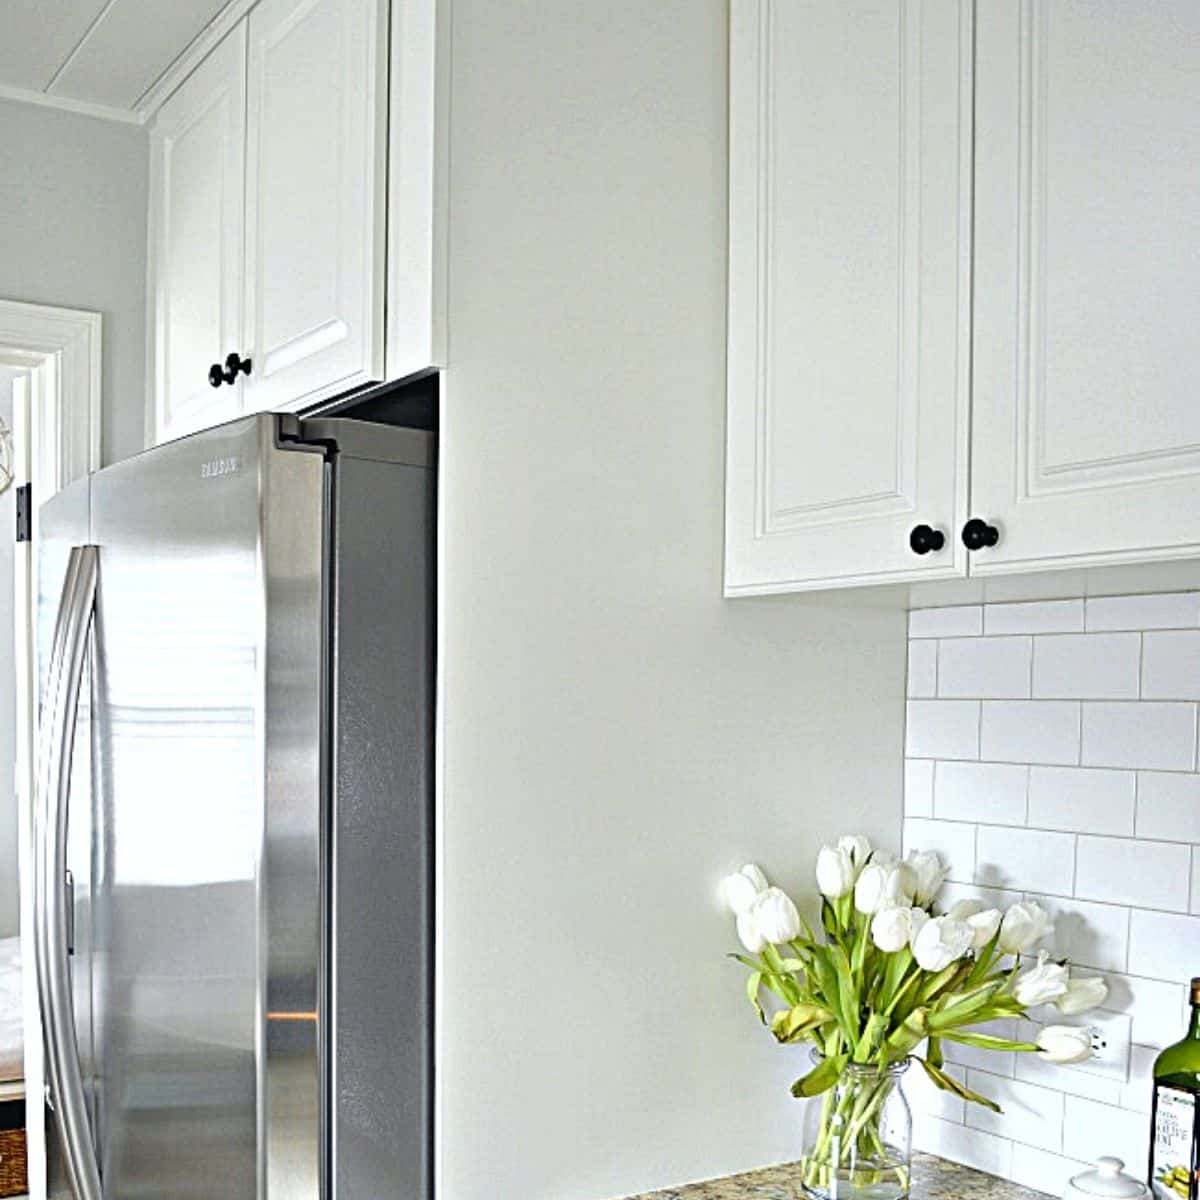 painted white cabinet built around stainless steel refrigerator